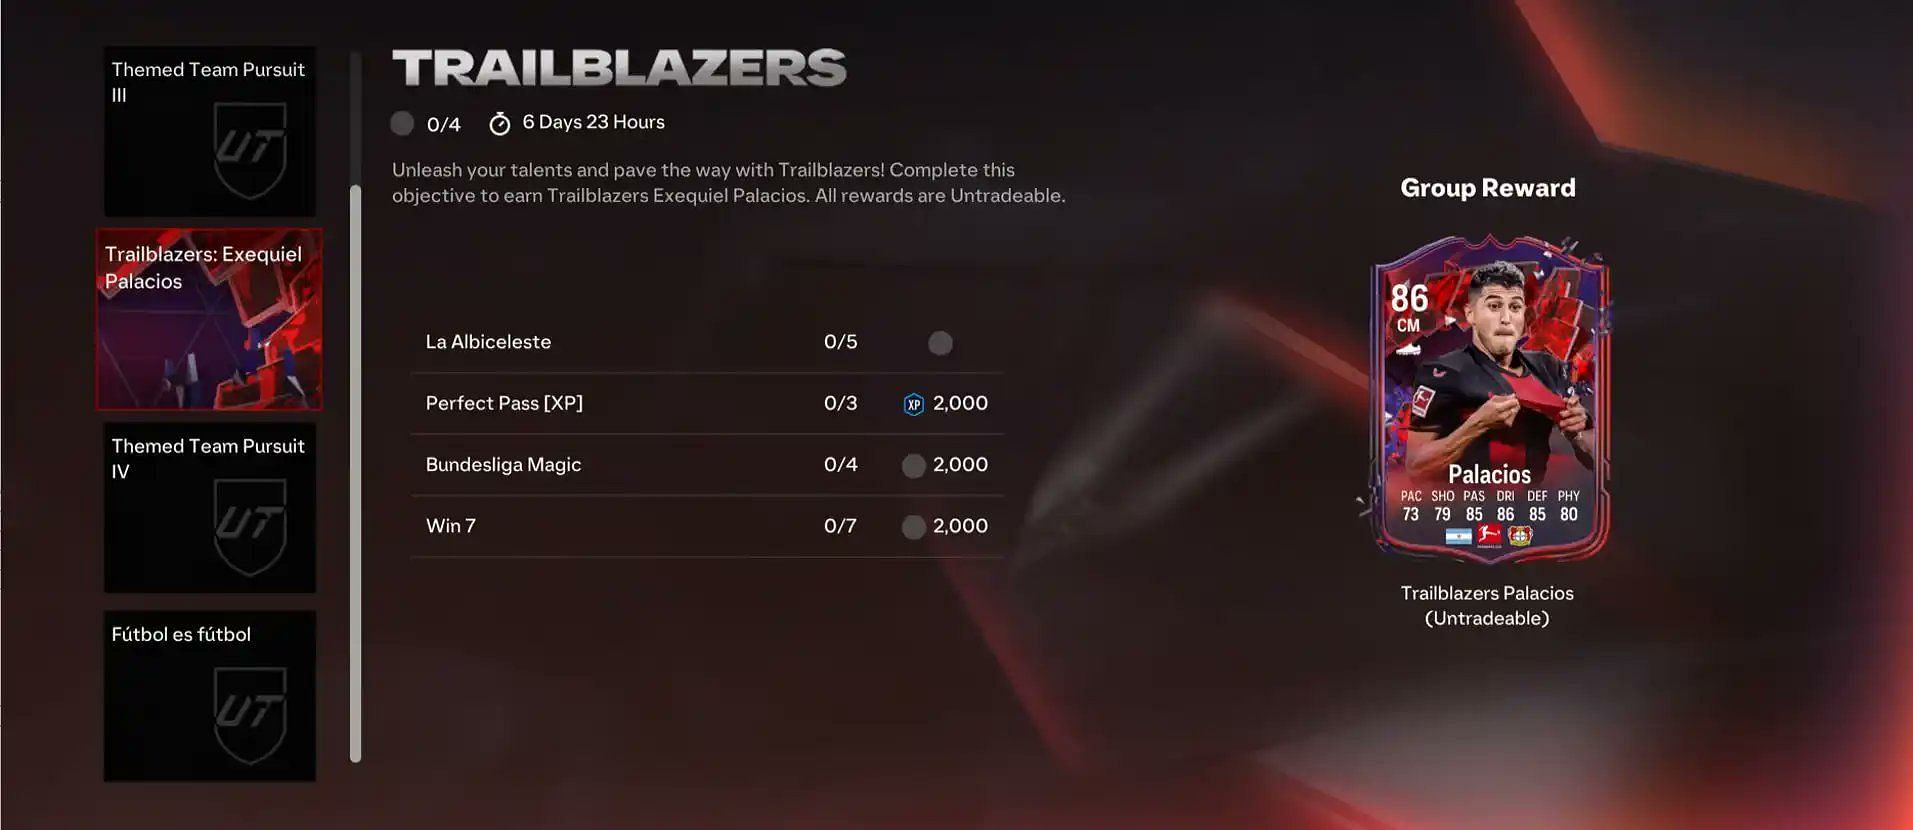 A new Trailblazers item is available in Ultimate Team (Image via EA Sports)